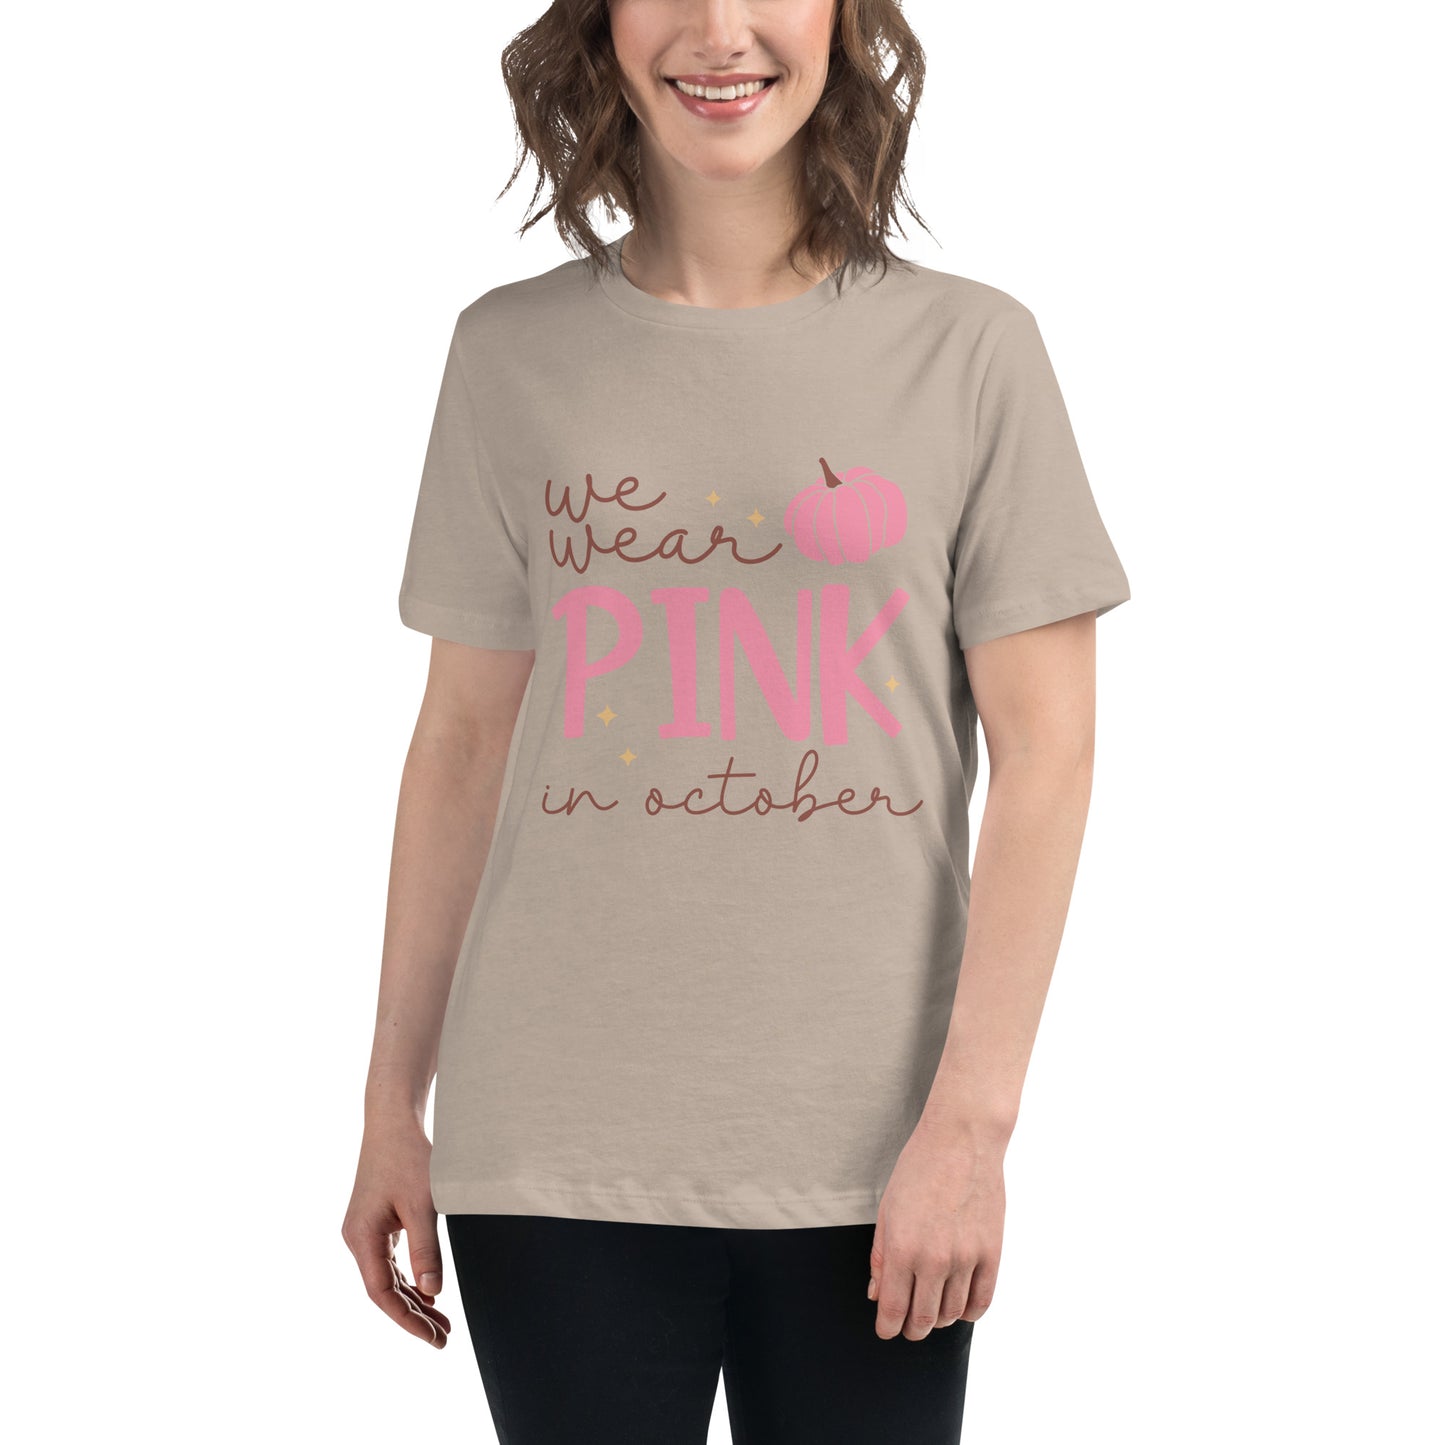 We Wear Pink in October Breast Cancer Awareness Women's Relaxed T-Shirt Tee Tshirt